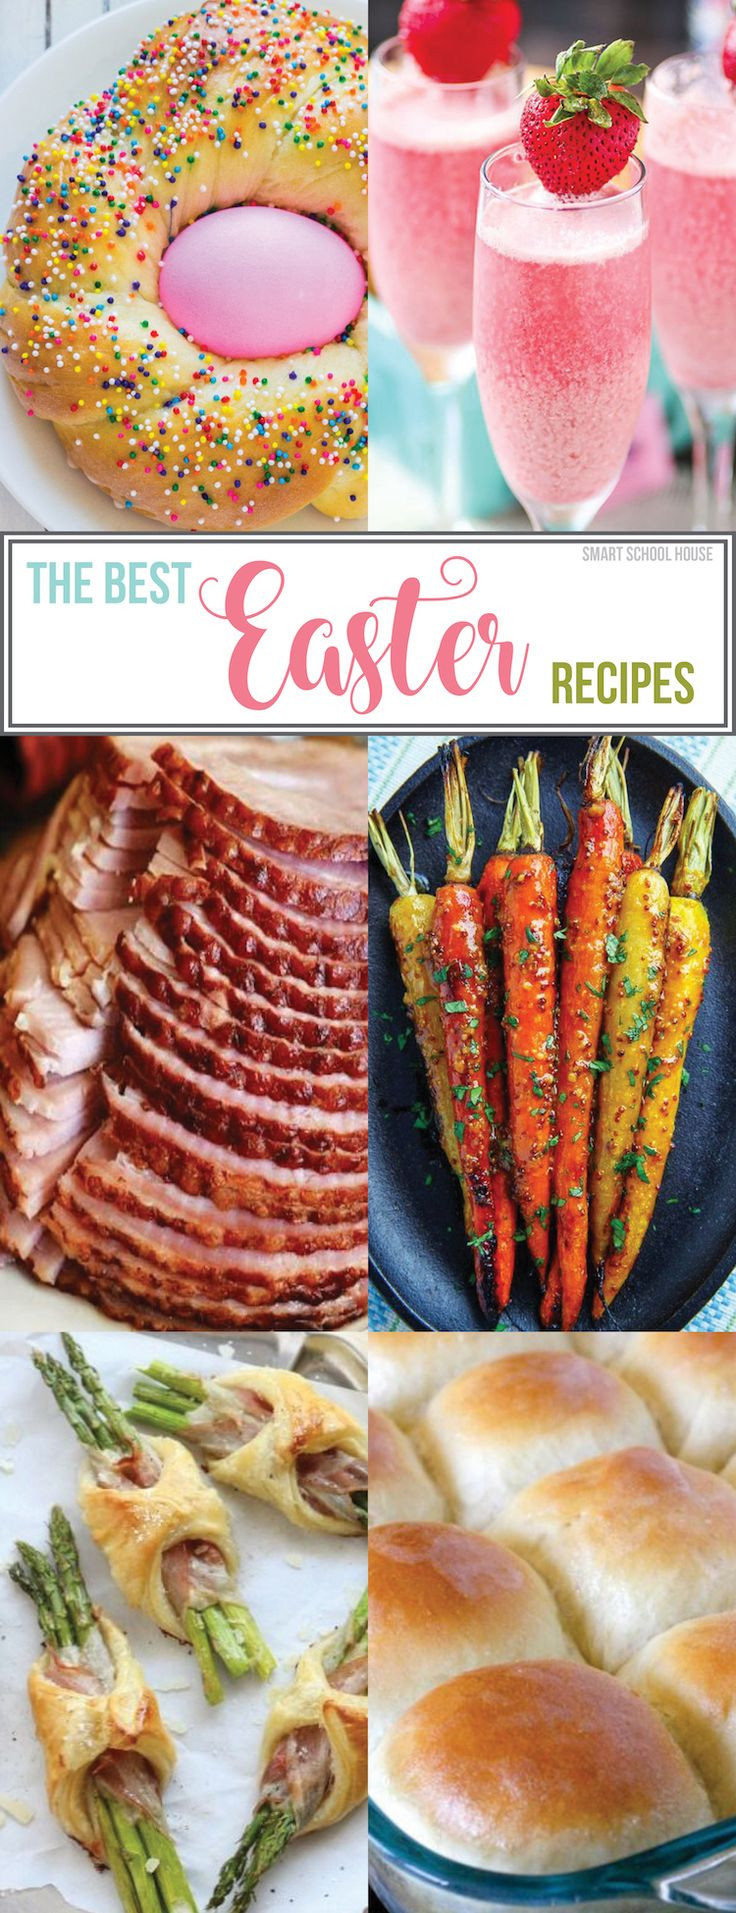 Easter Dinner Ideas No Ham
 1002 best images about Easter on Pinterest